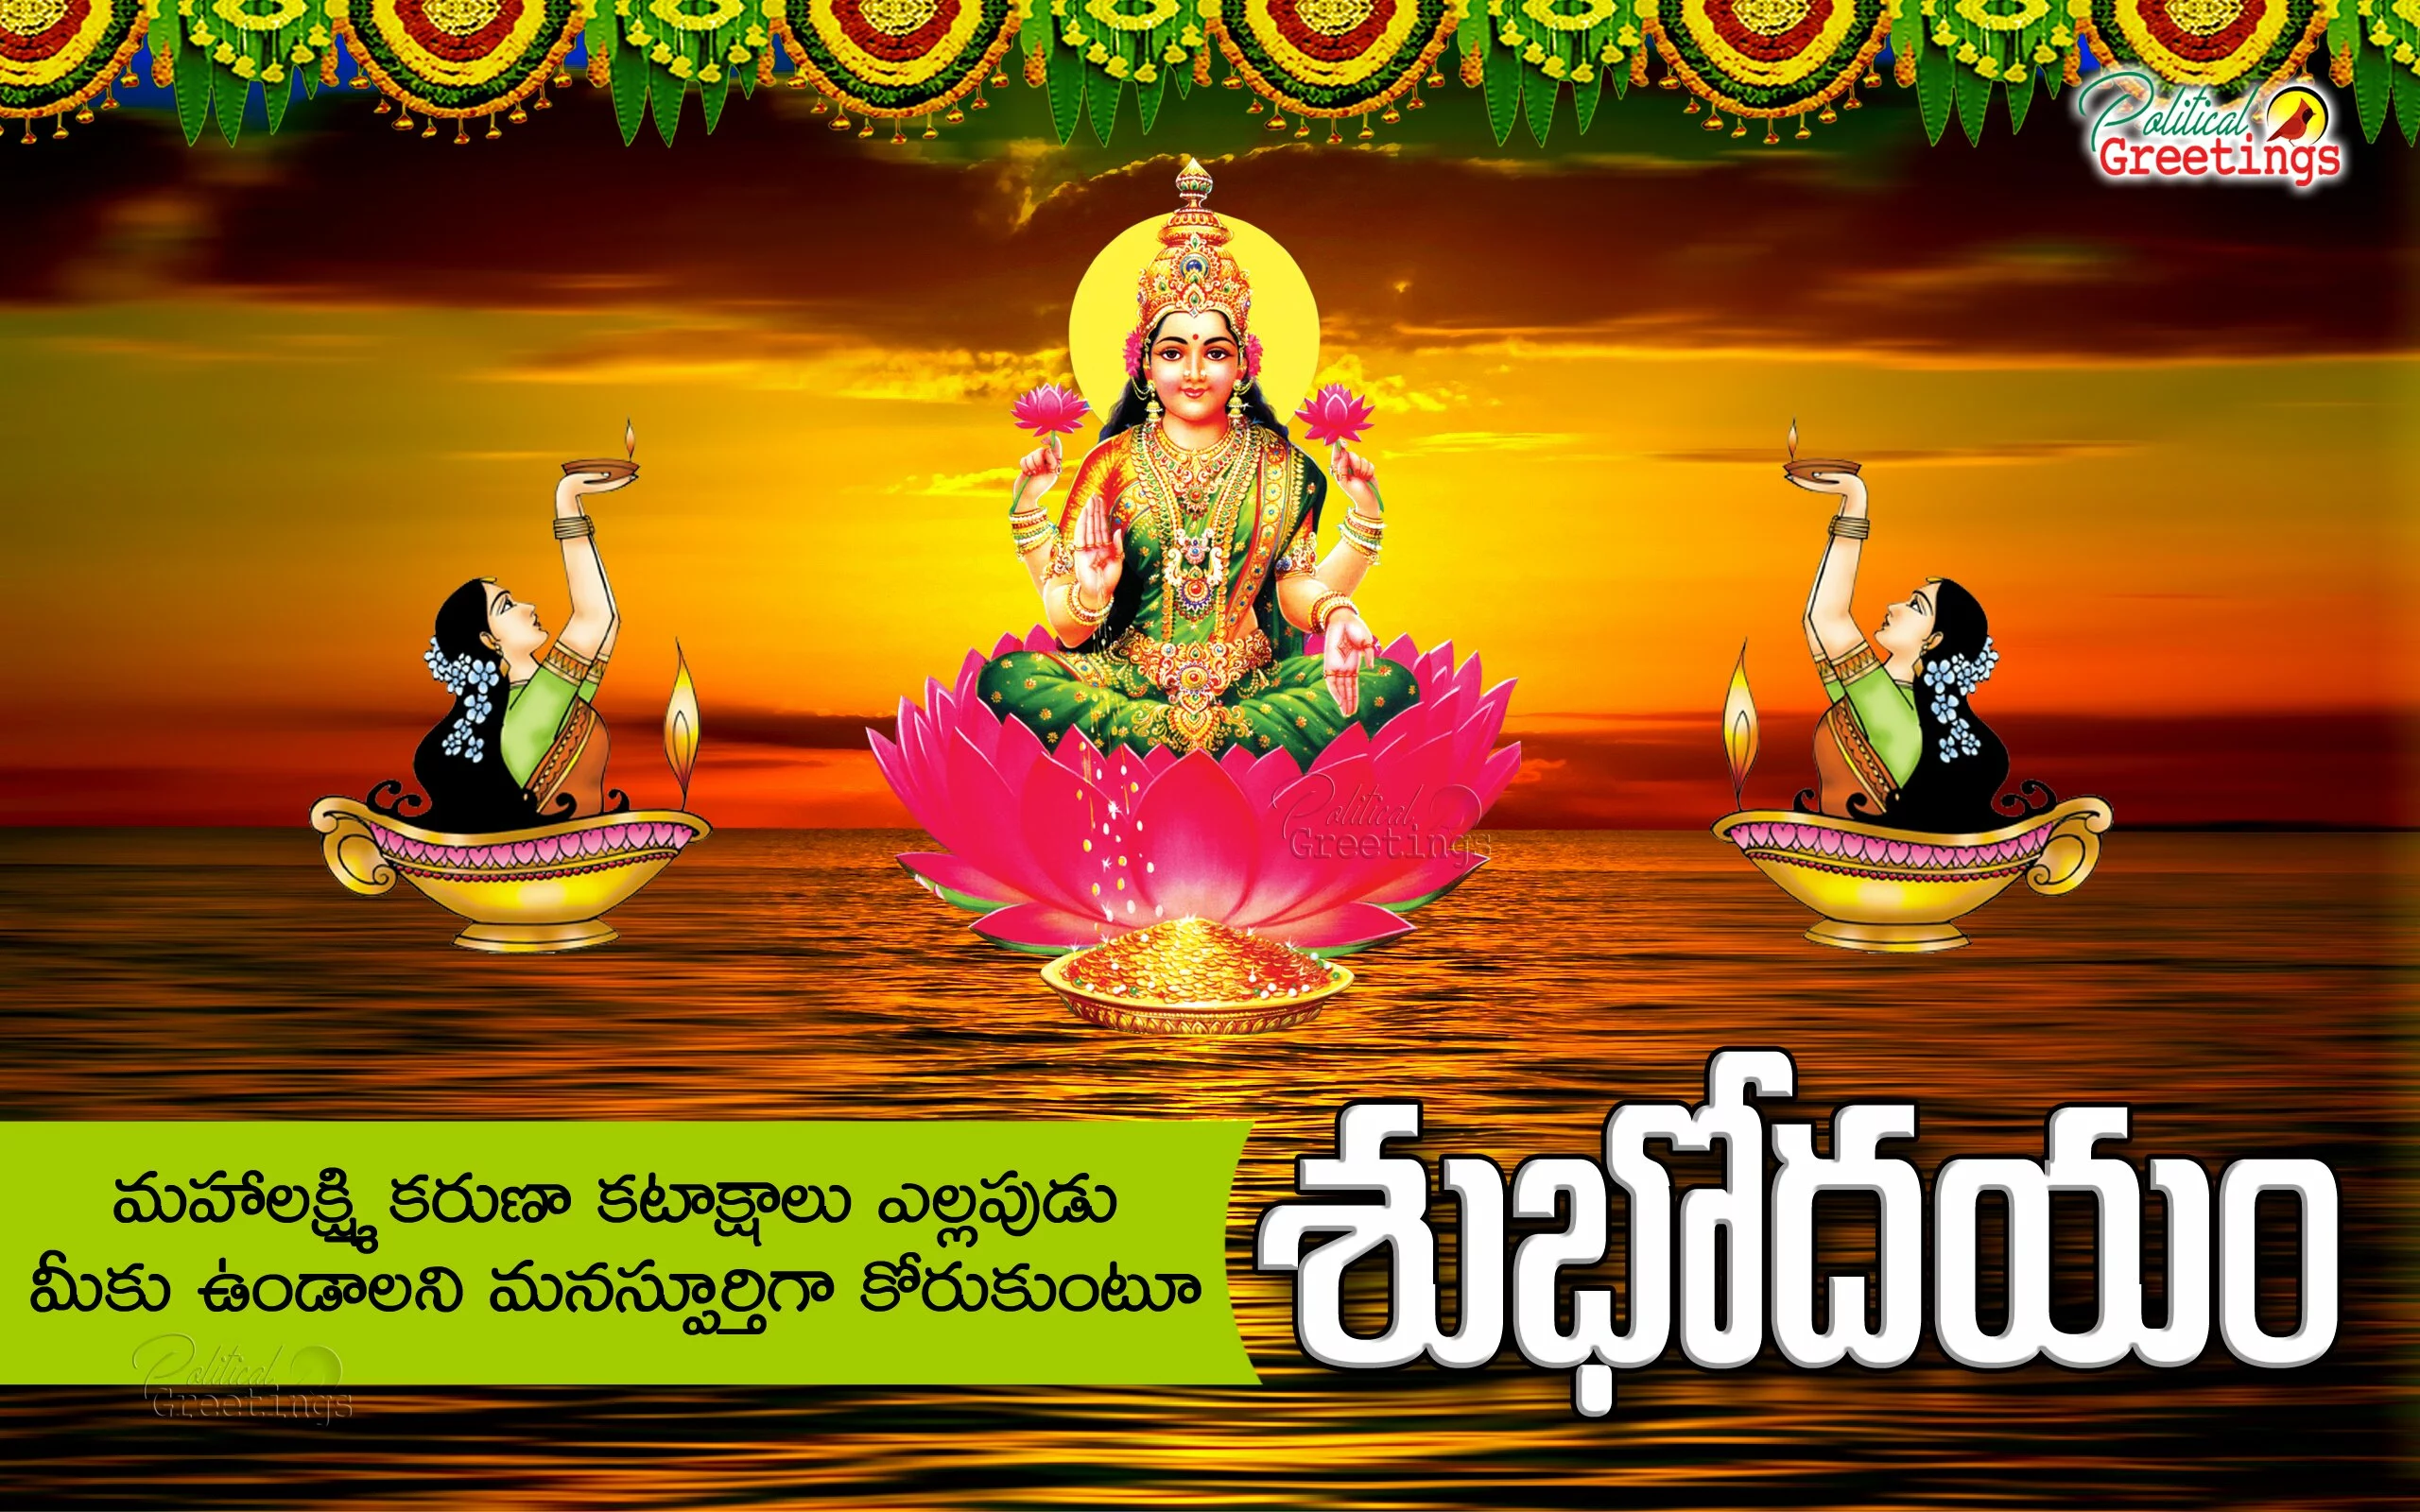 good-morning-telugu-message-quotes-wishes-greetings-images-with-mahalaxmi-wallpapers